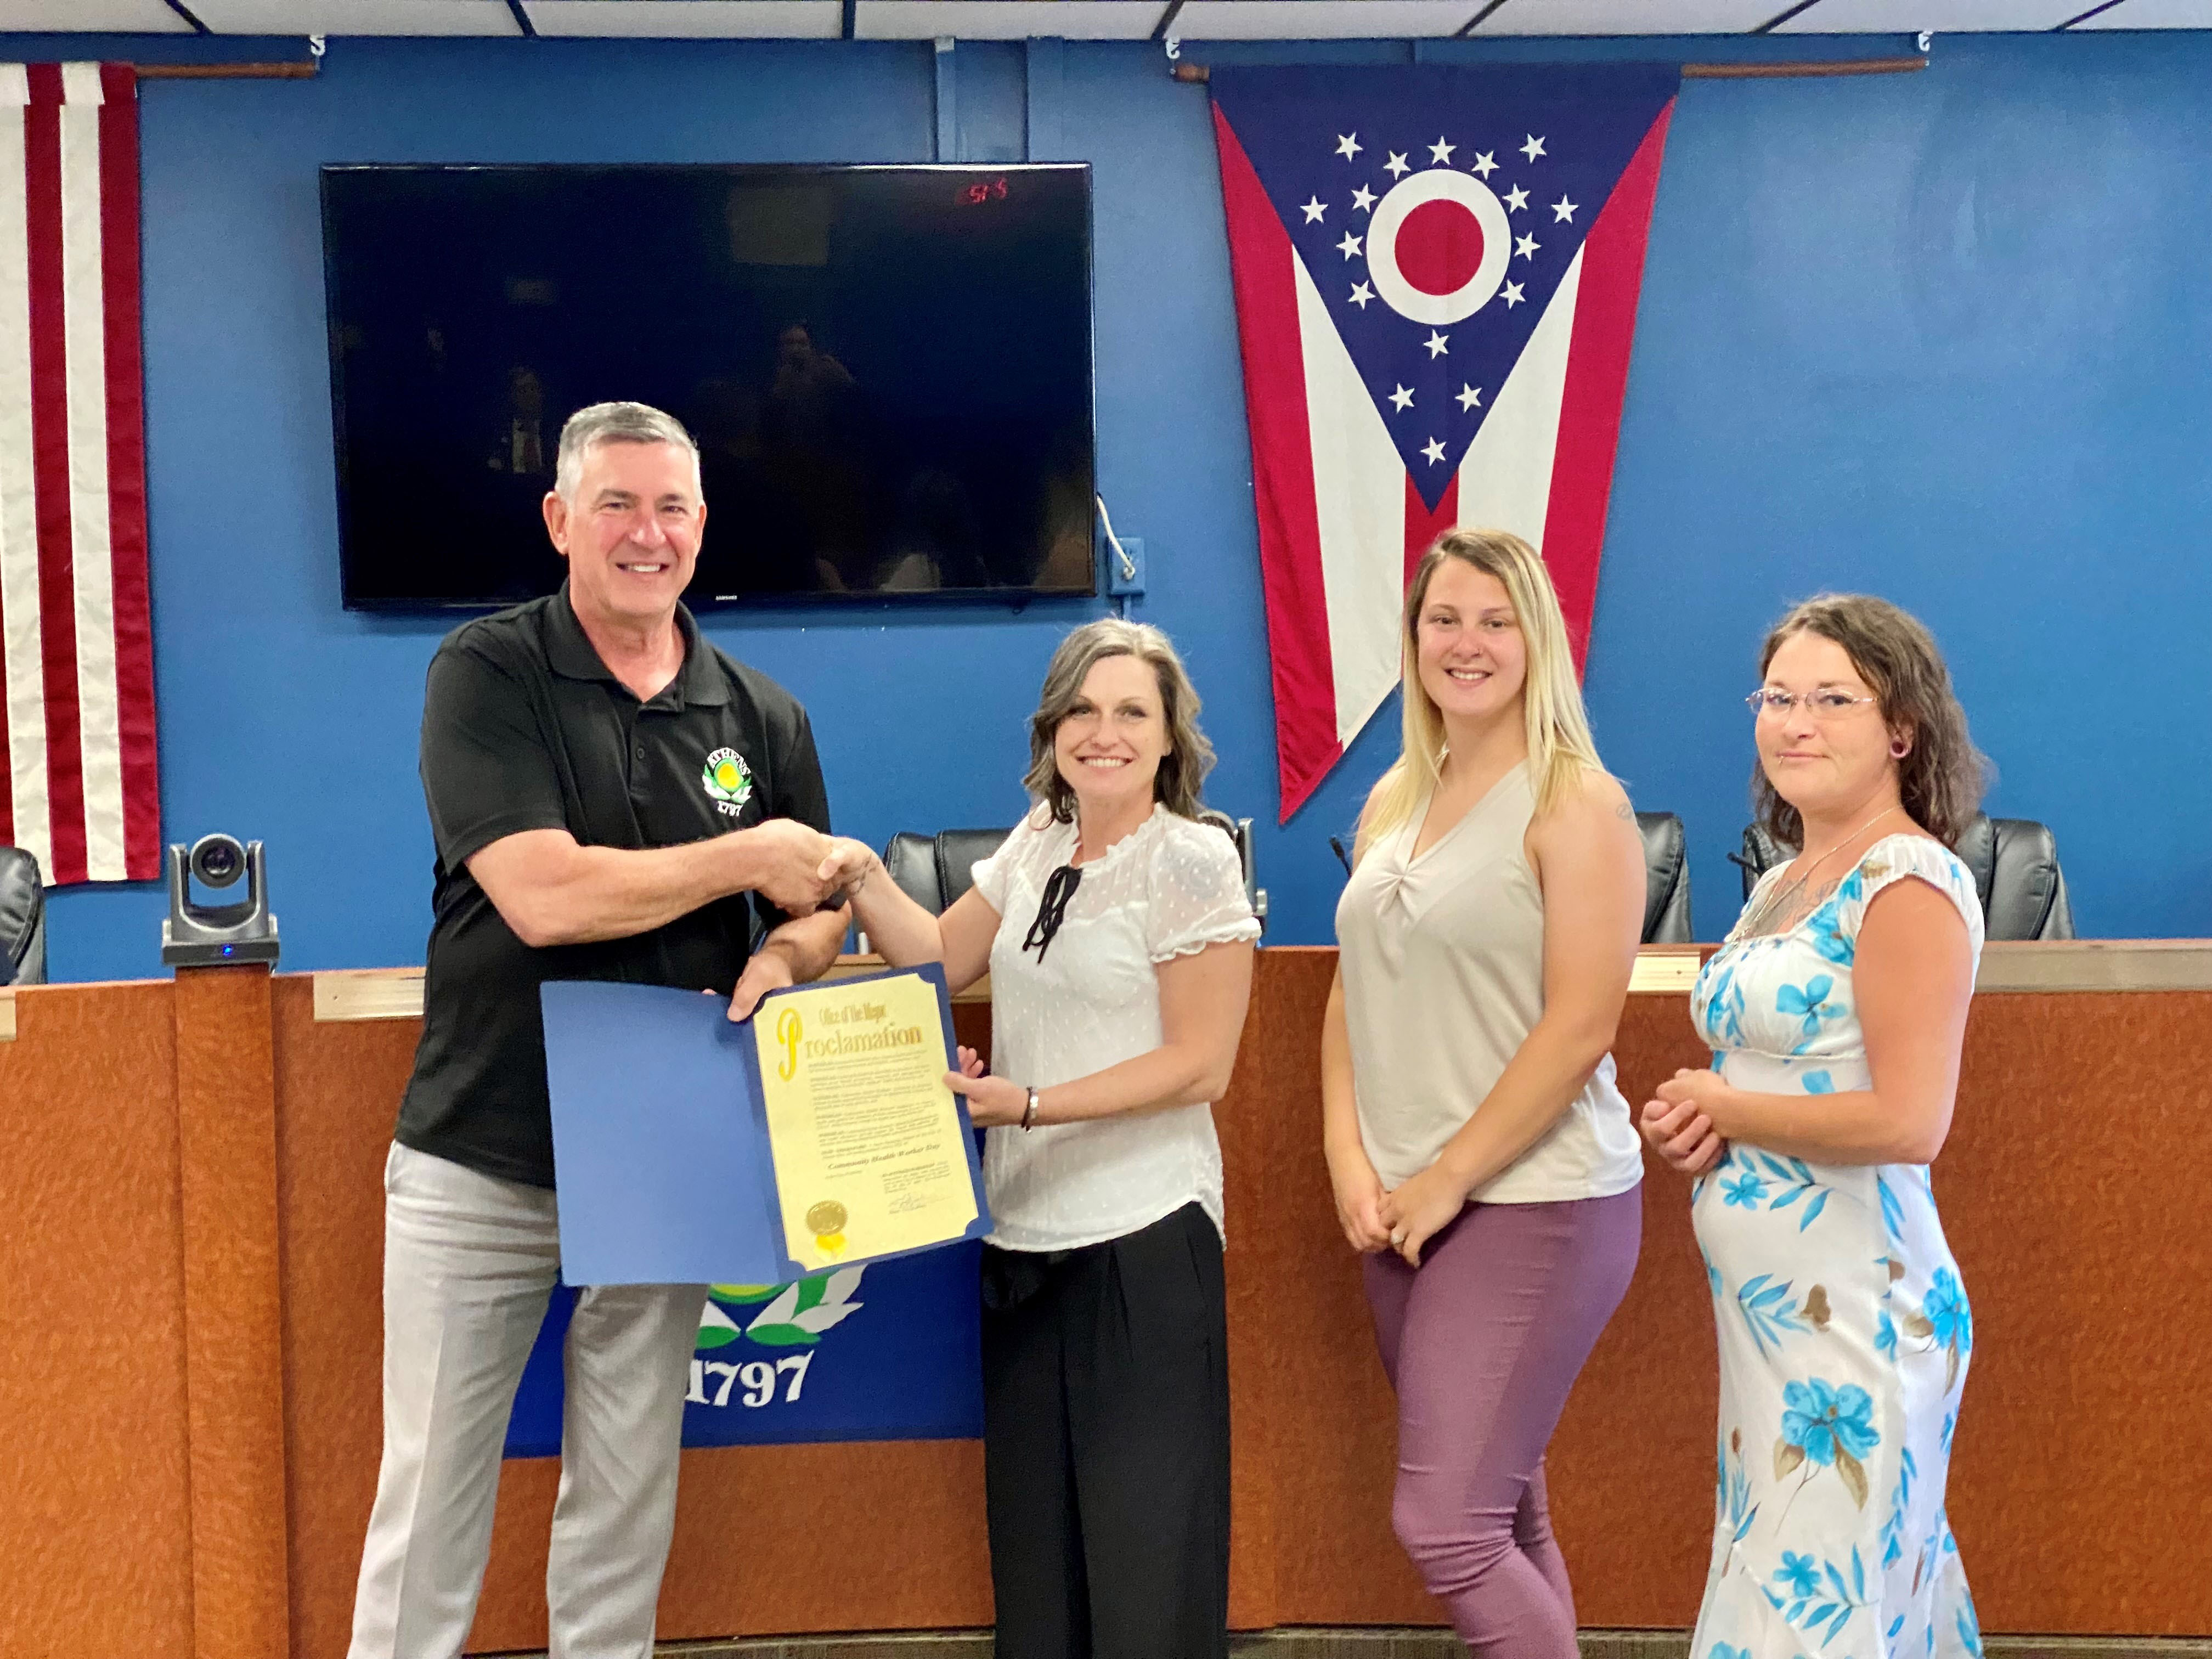 City of Athens signs proclamation making June 6 Community Health Worker Day